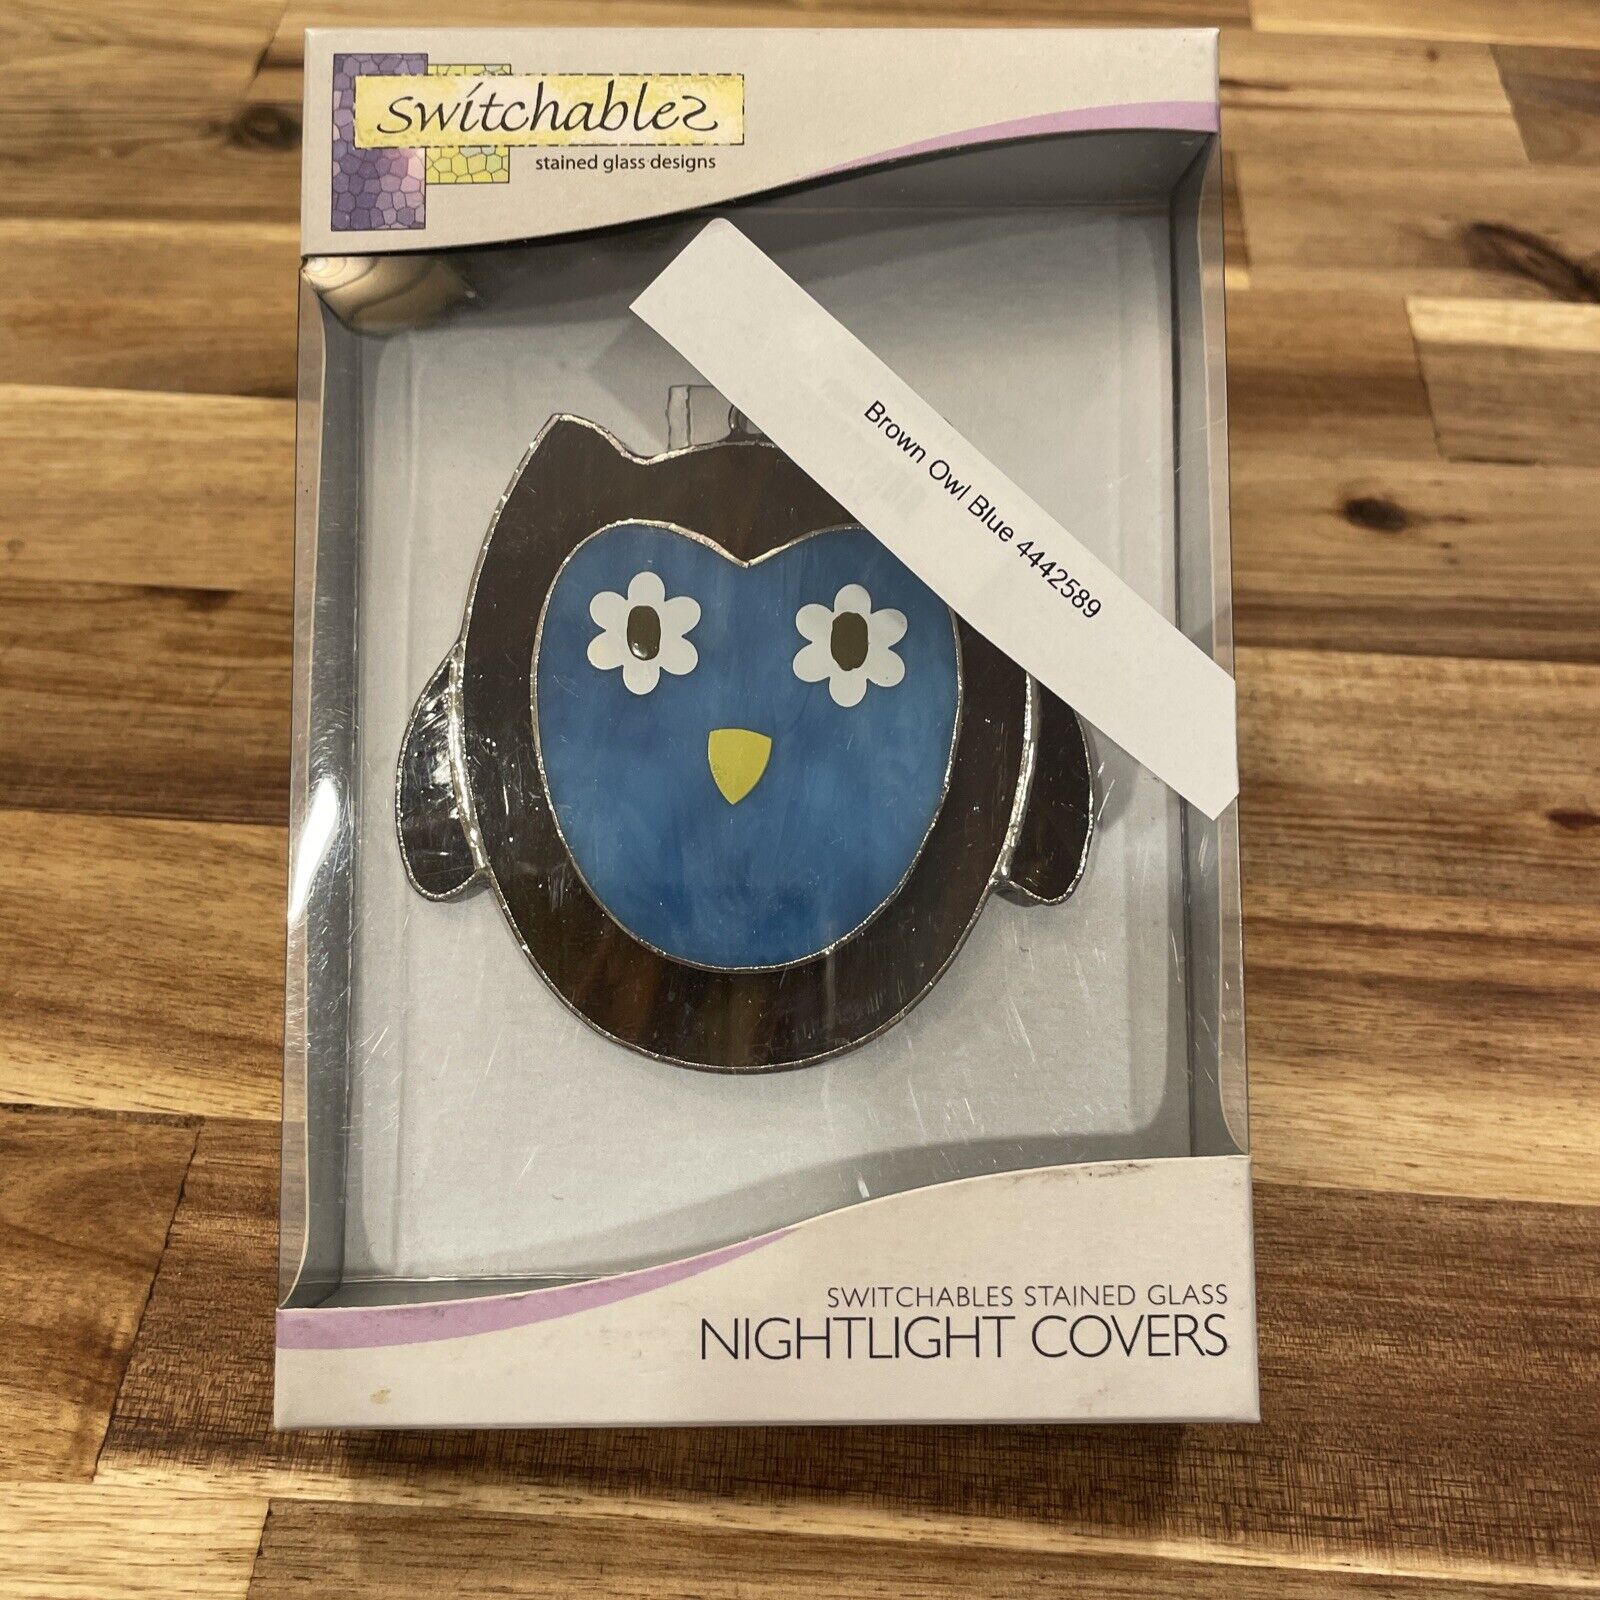 Switchable stained glass Brown, And Blue Owl nightlight cover